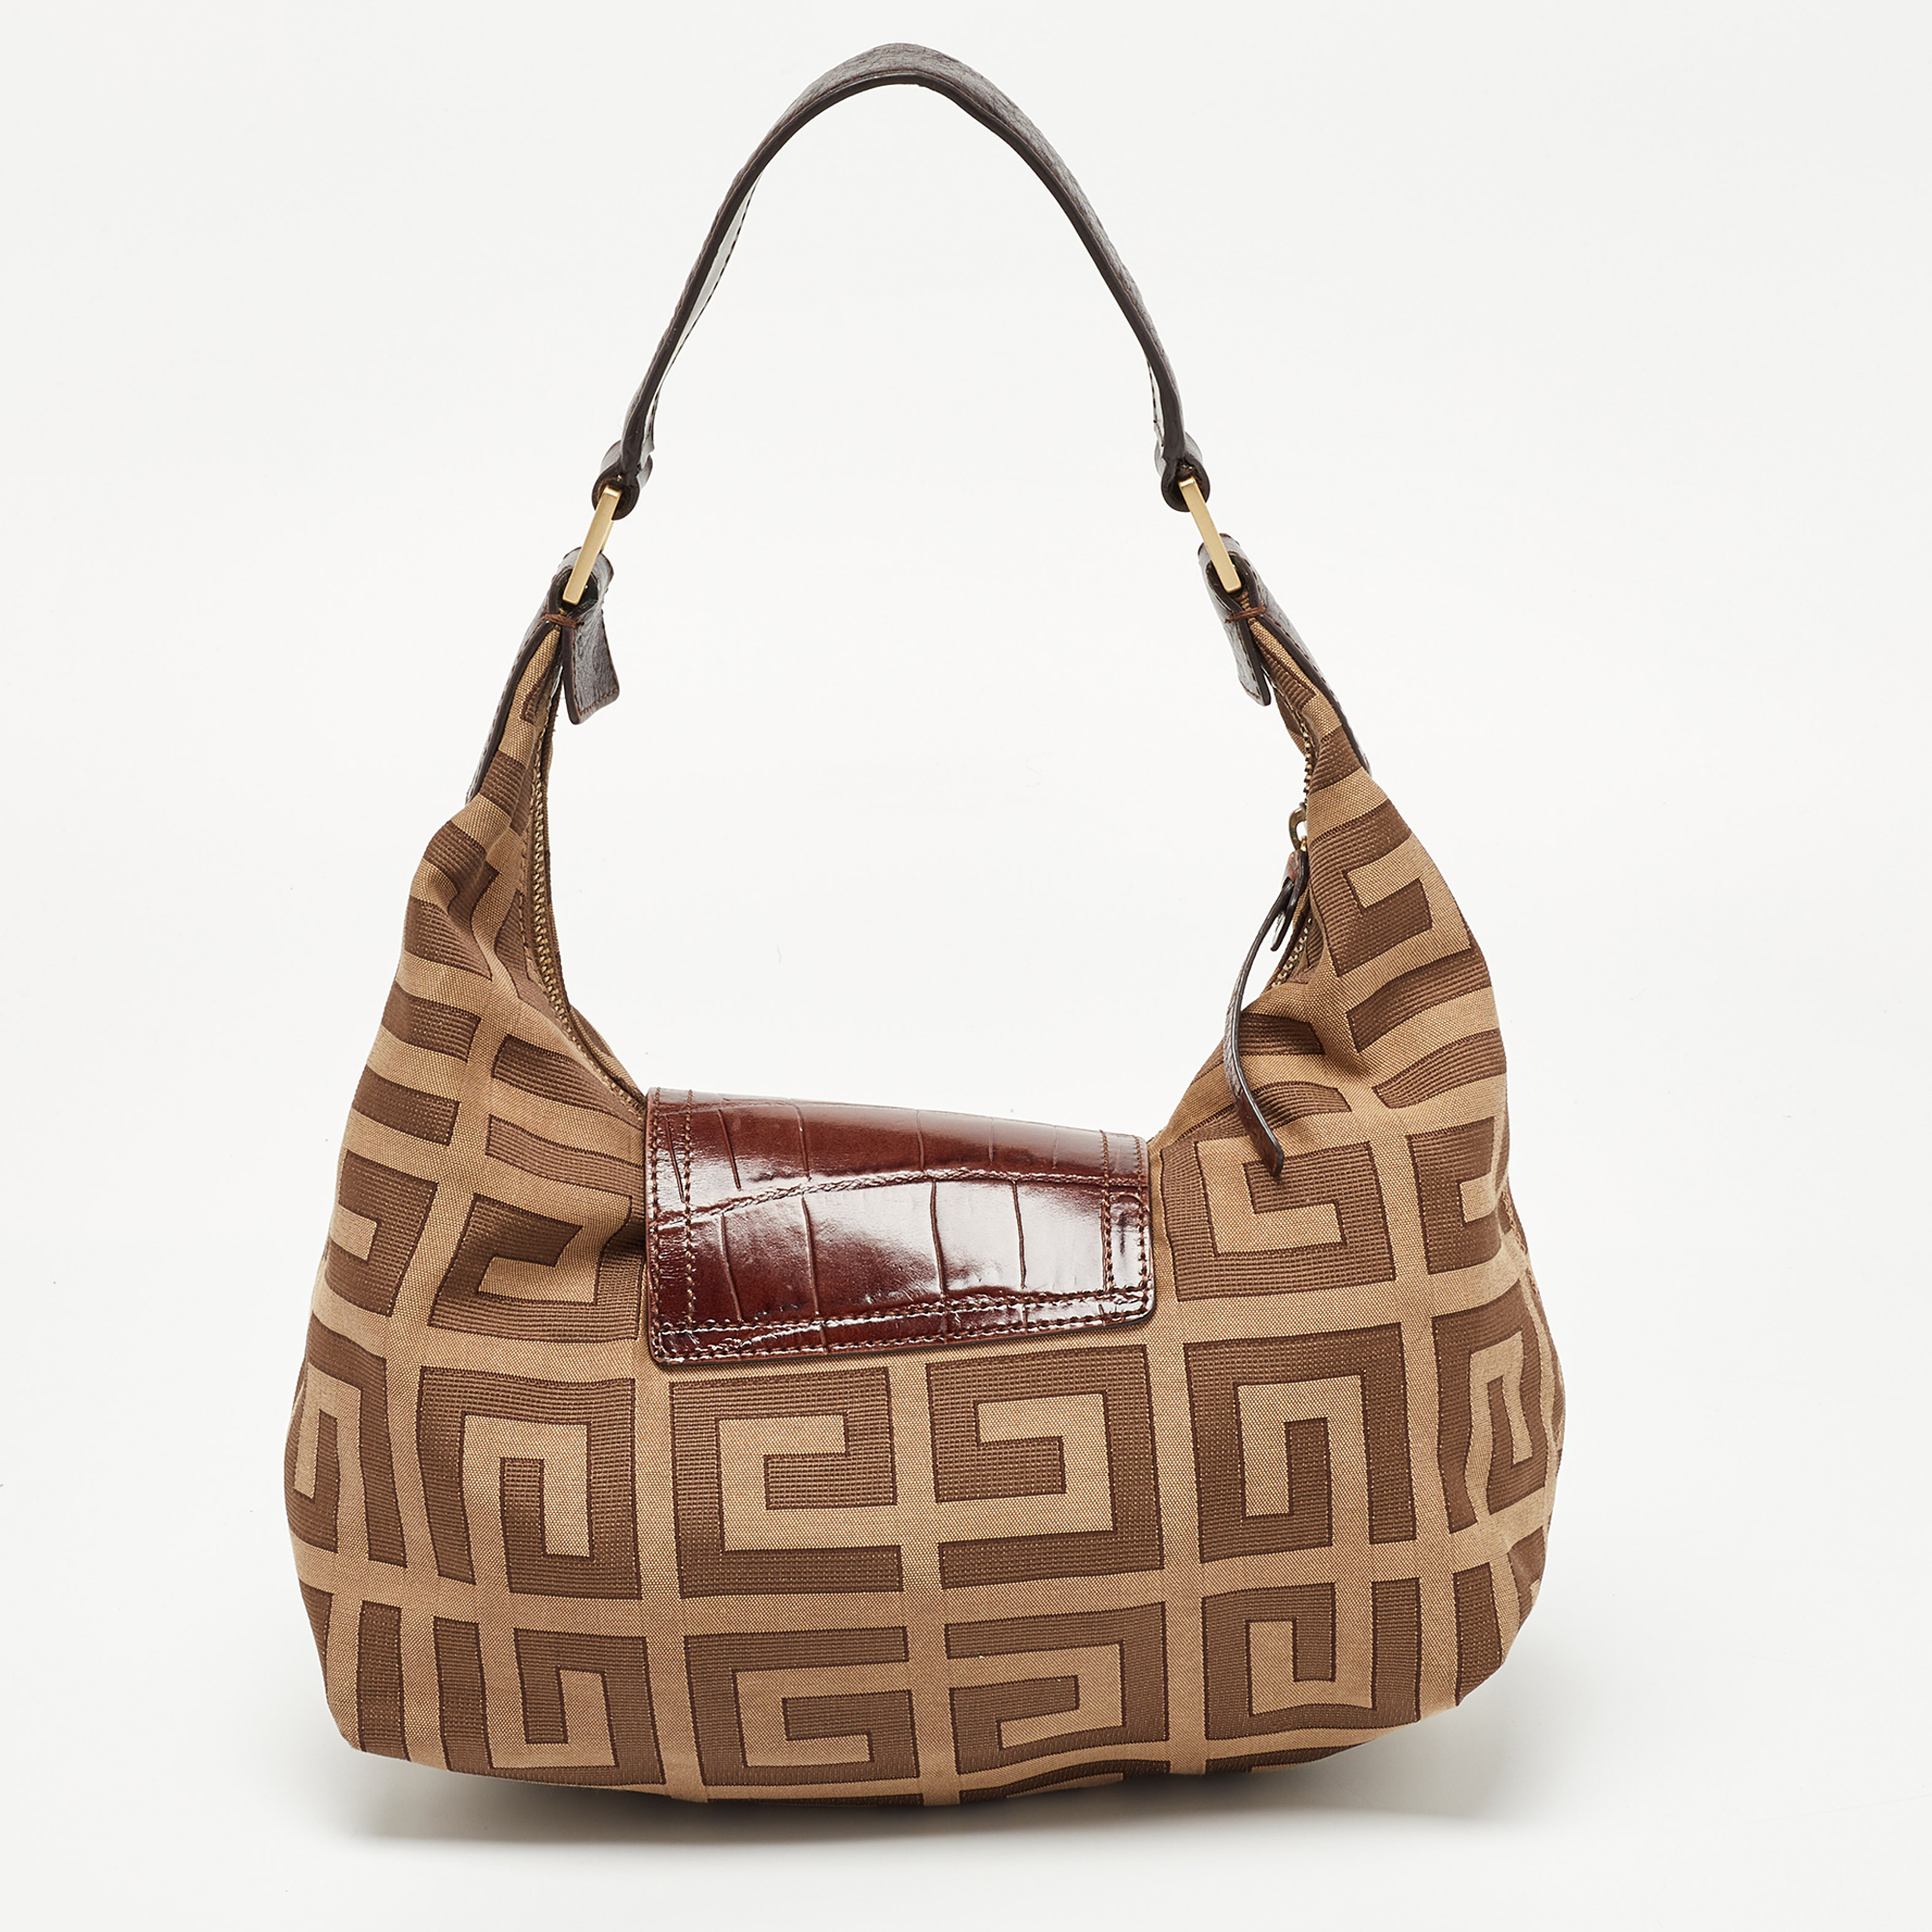 Givenchy Beige/Brown Signature Canvas And Croc Embossed Leather Hobo